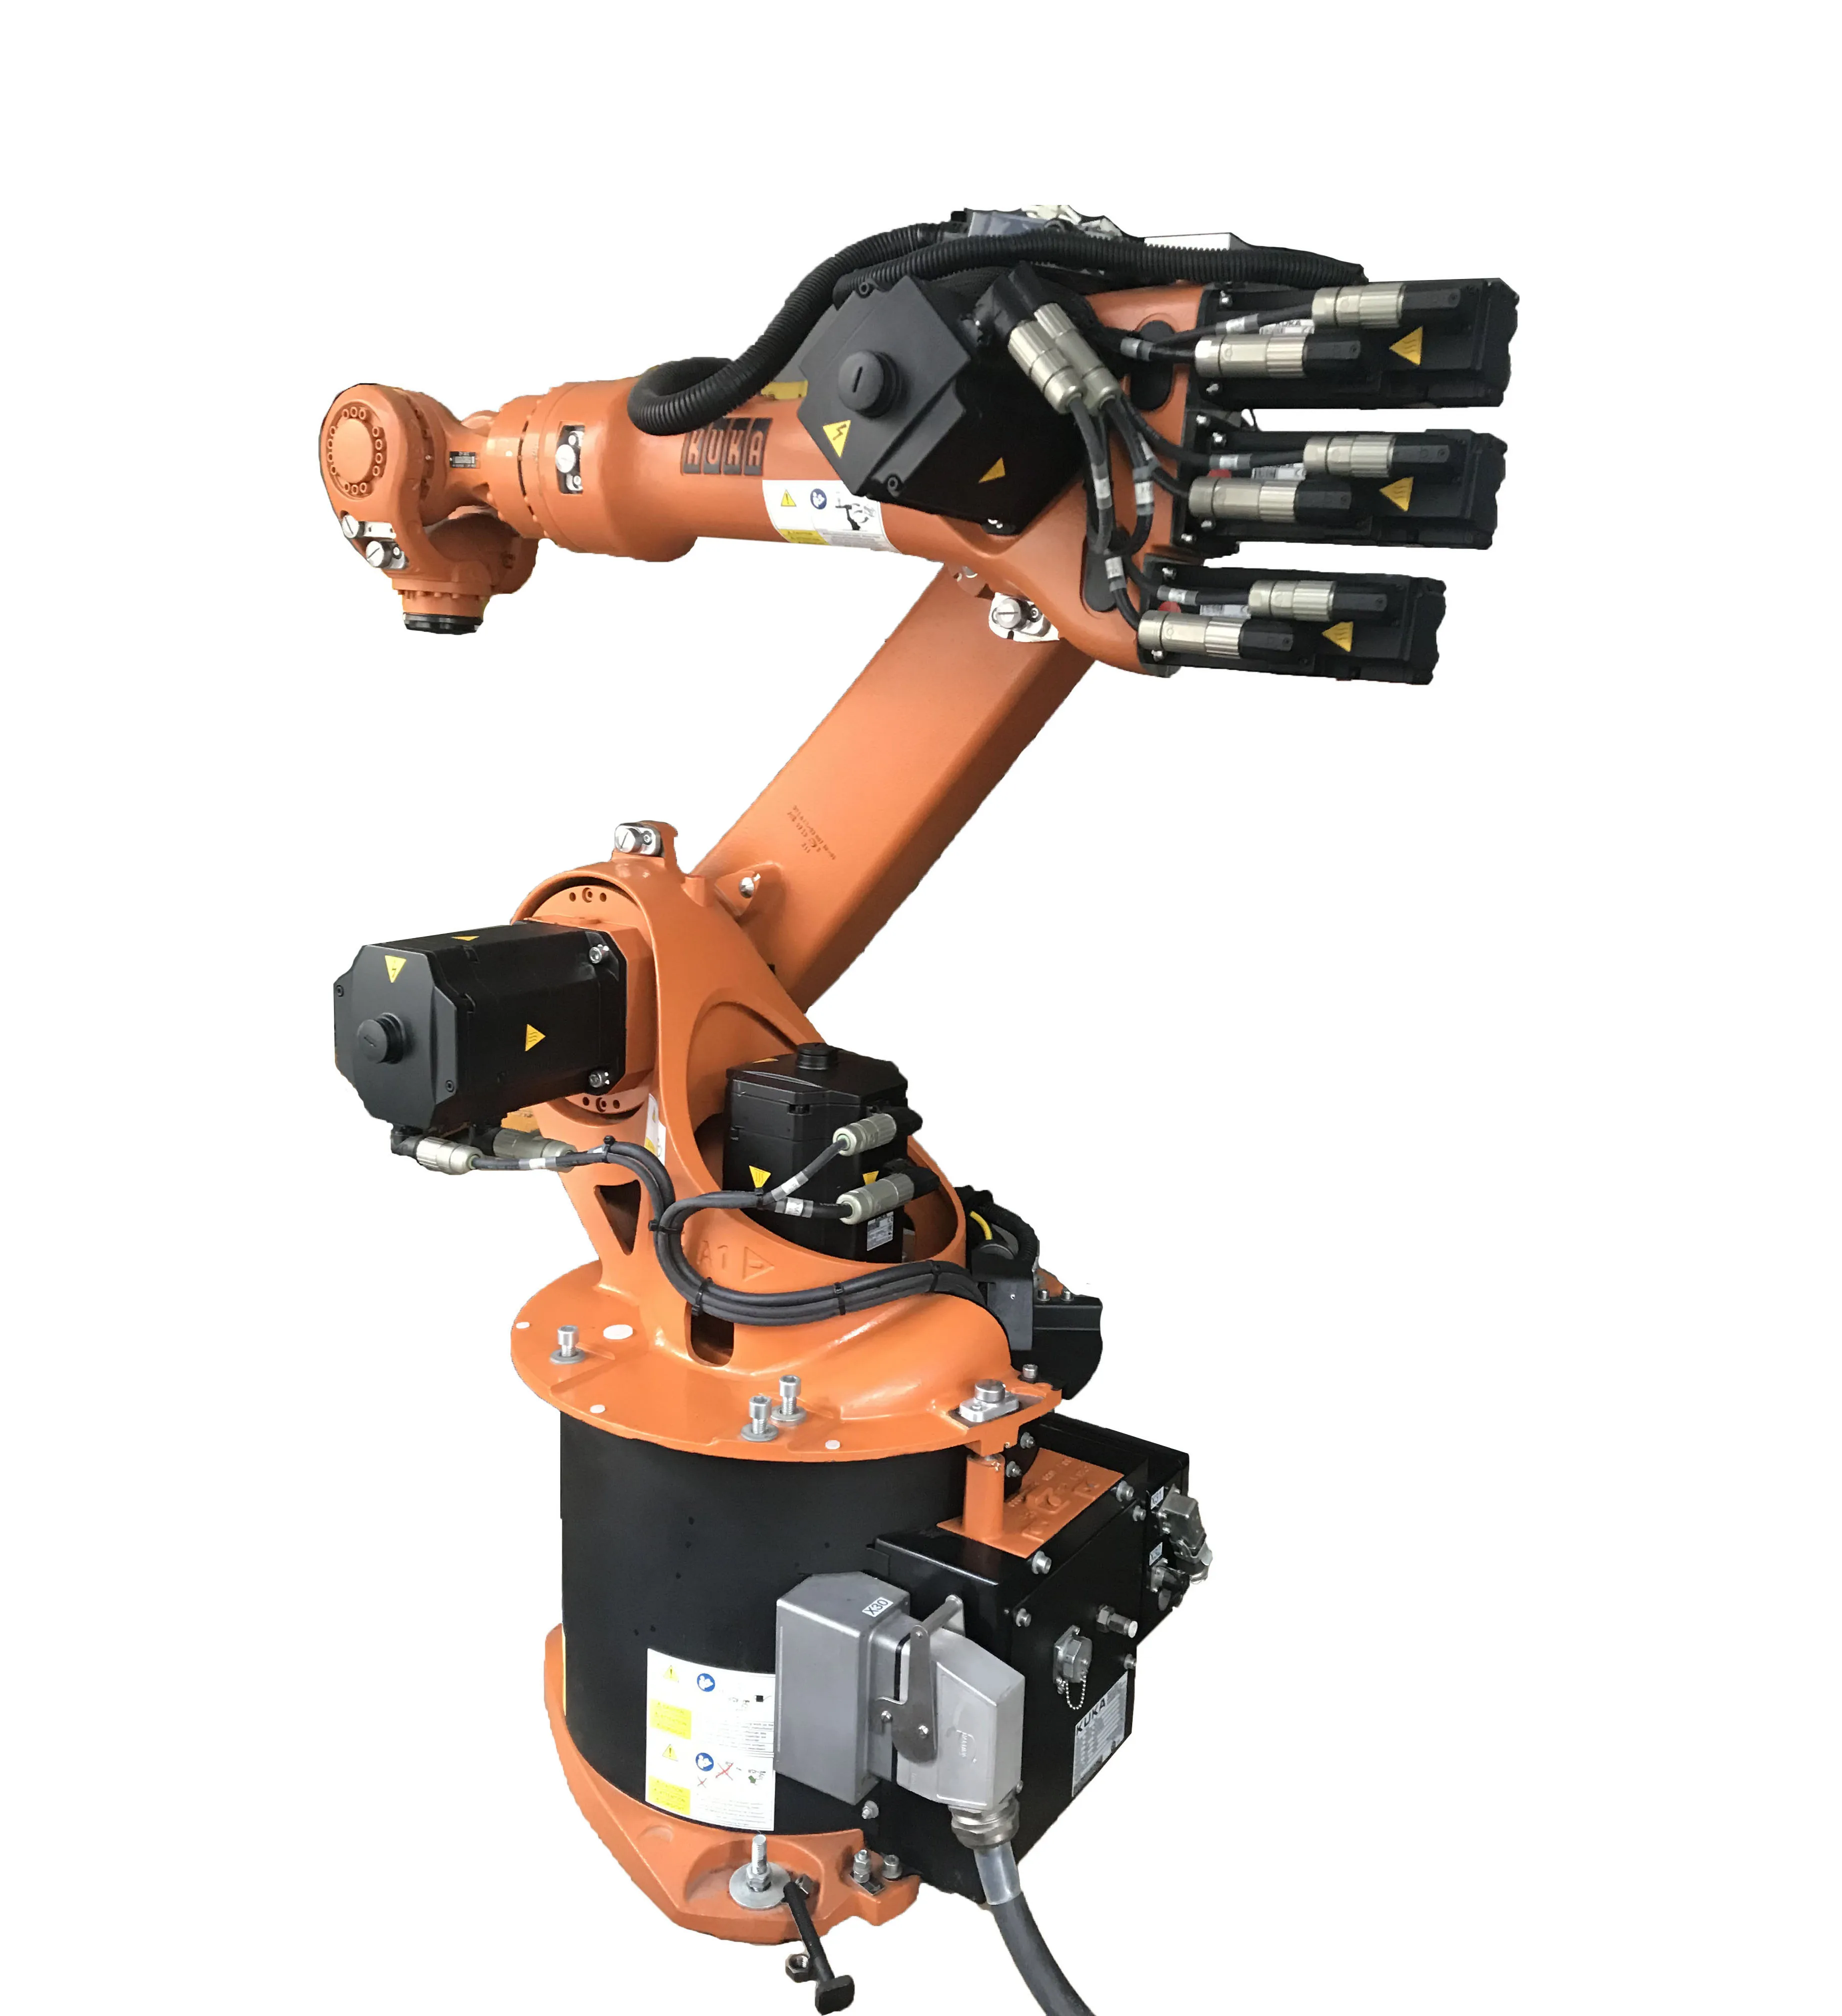 Bygge videre på Envision rekruttere Source Industrial Manufacturing Robotic Arm Price Cheap High Quality Big Robot  Arm 6 Axis on m.alibaba.com